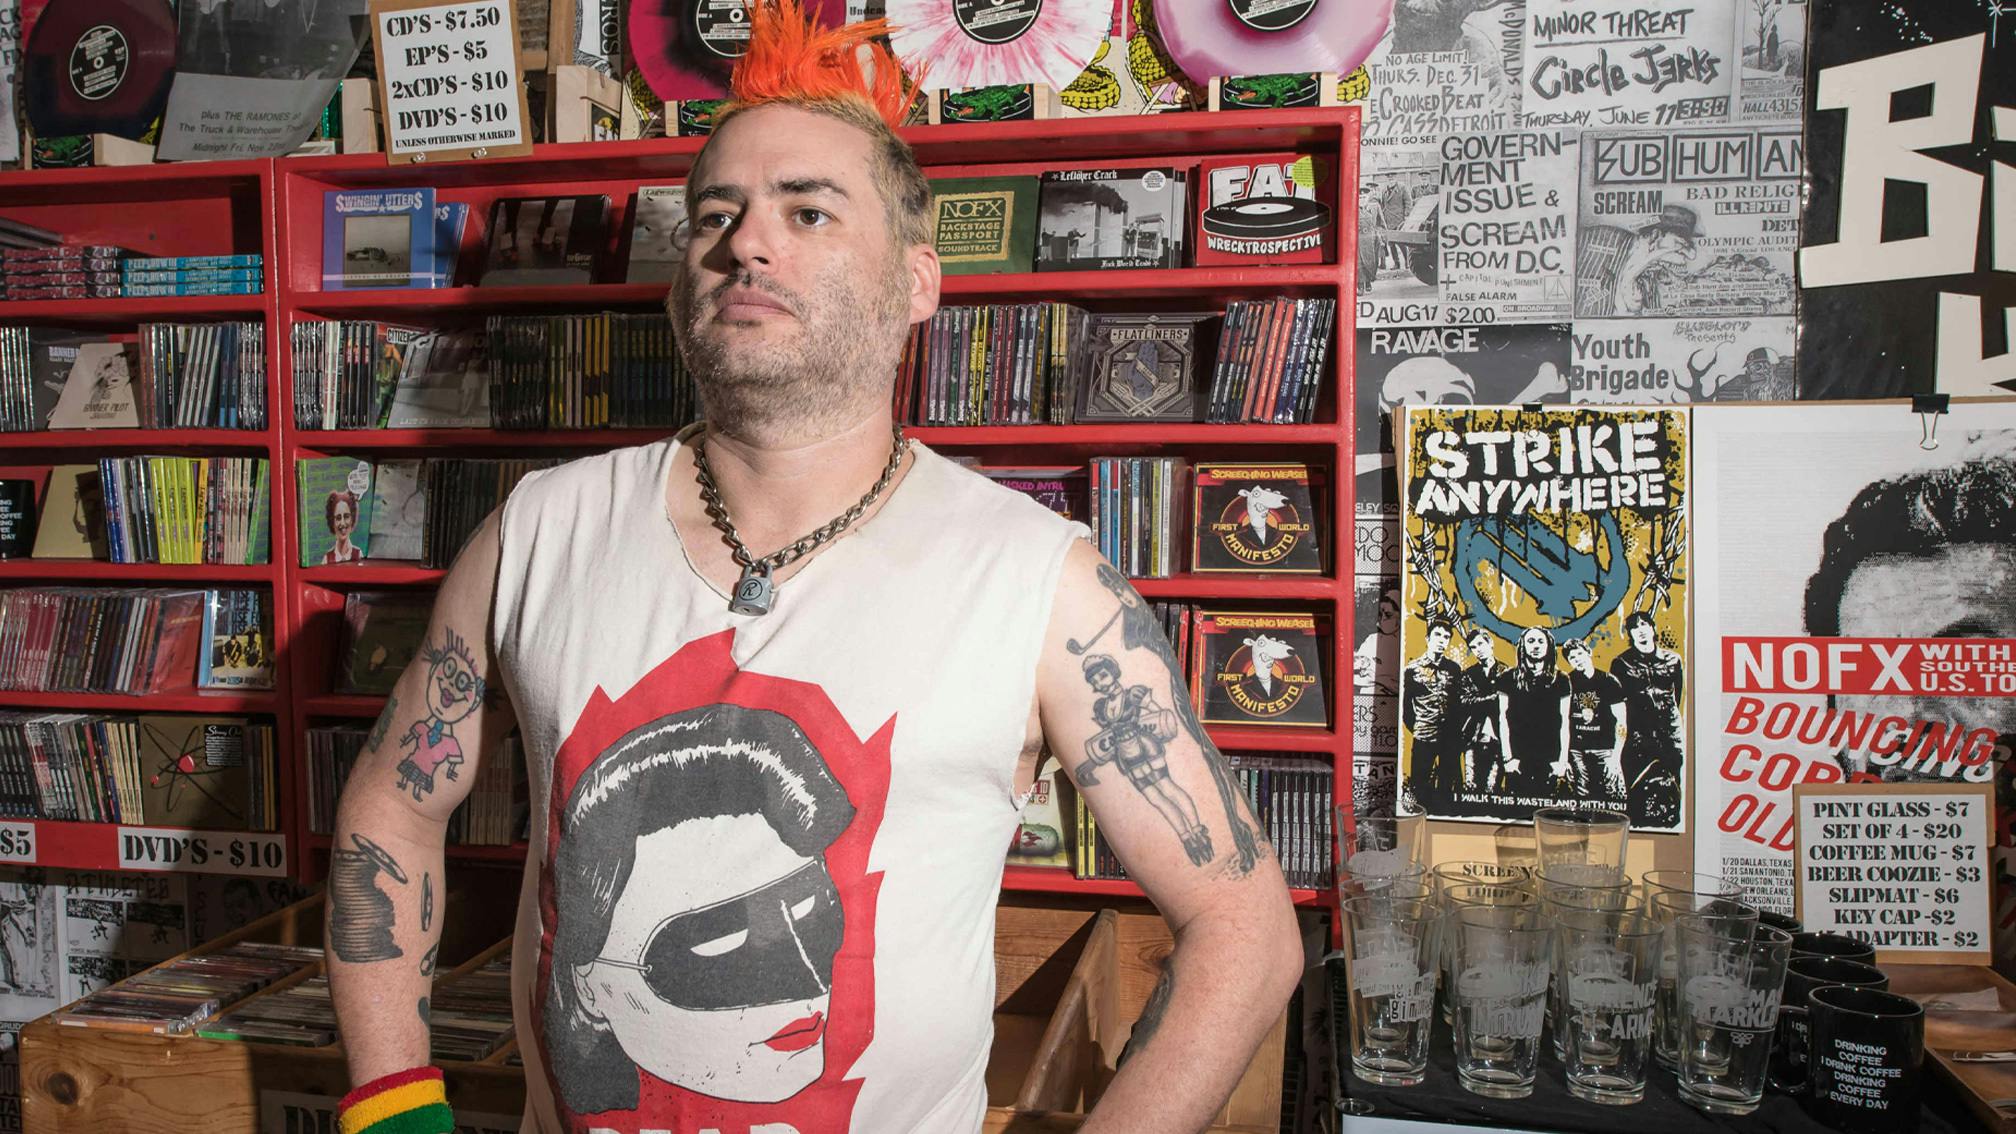 "Our country is just full of uneducated racist idiots, and that’s crazy": Fat Mike on the state of America